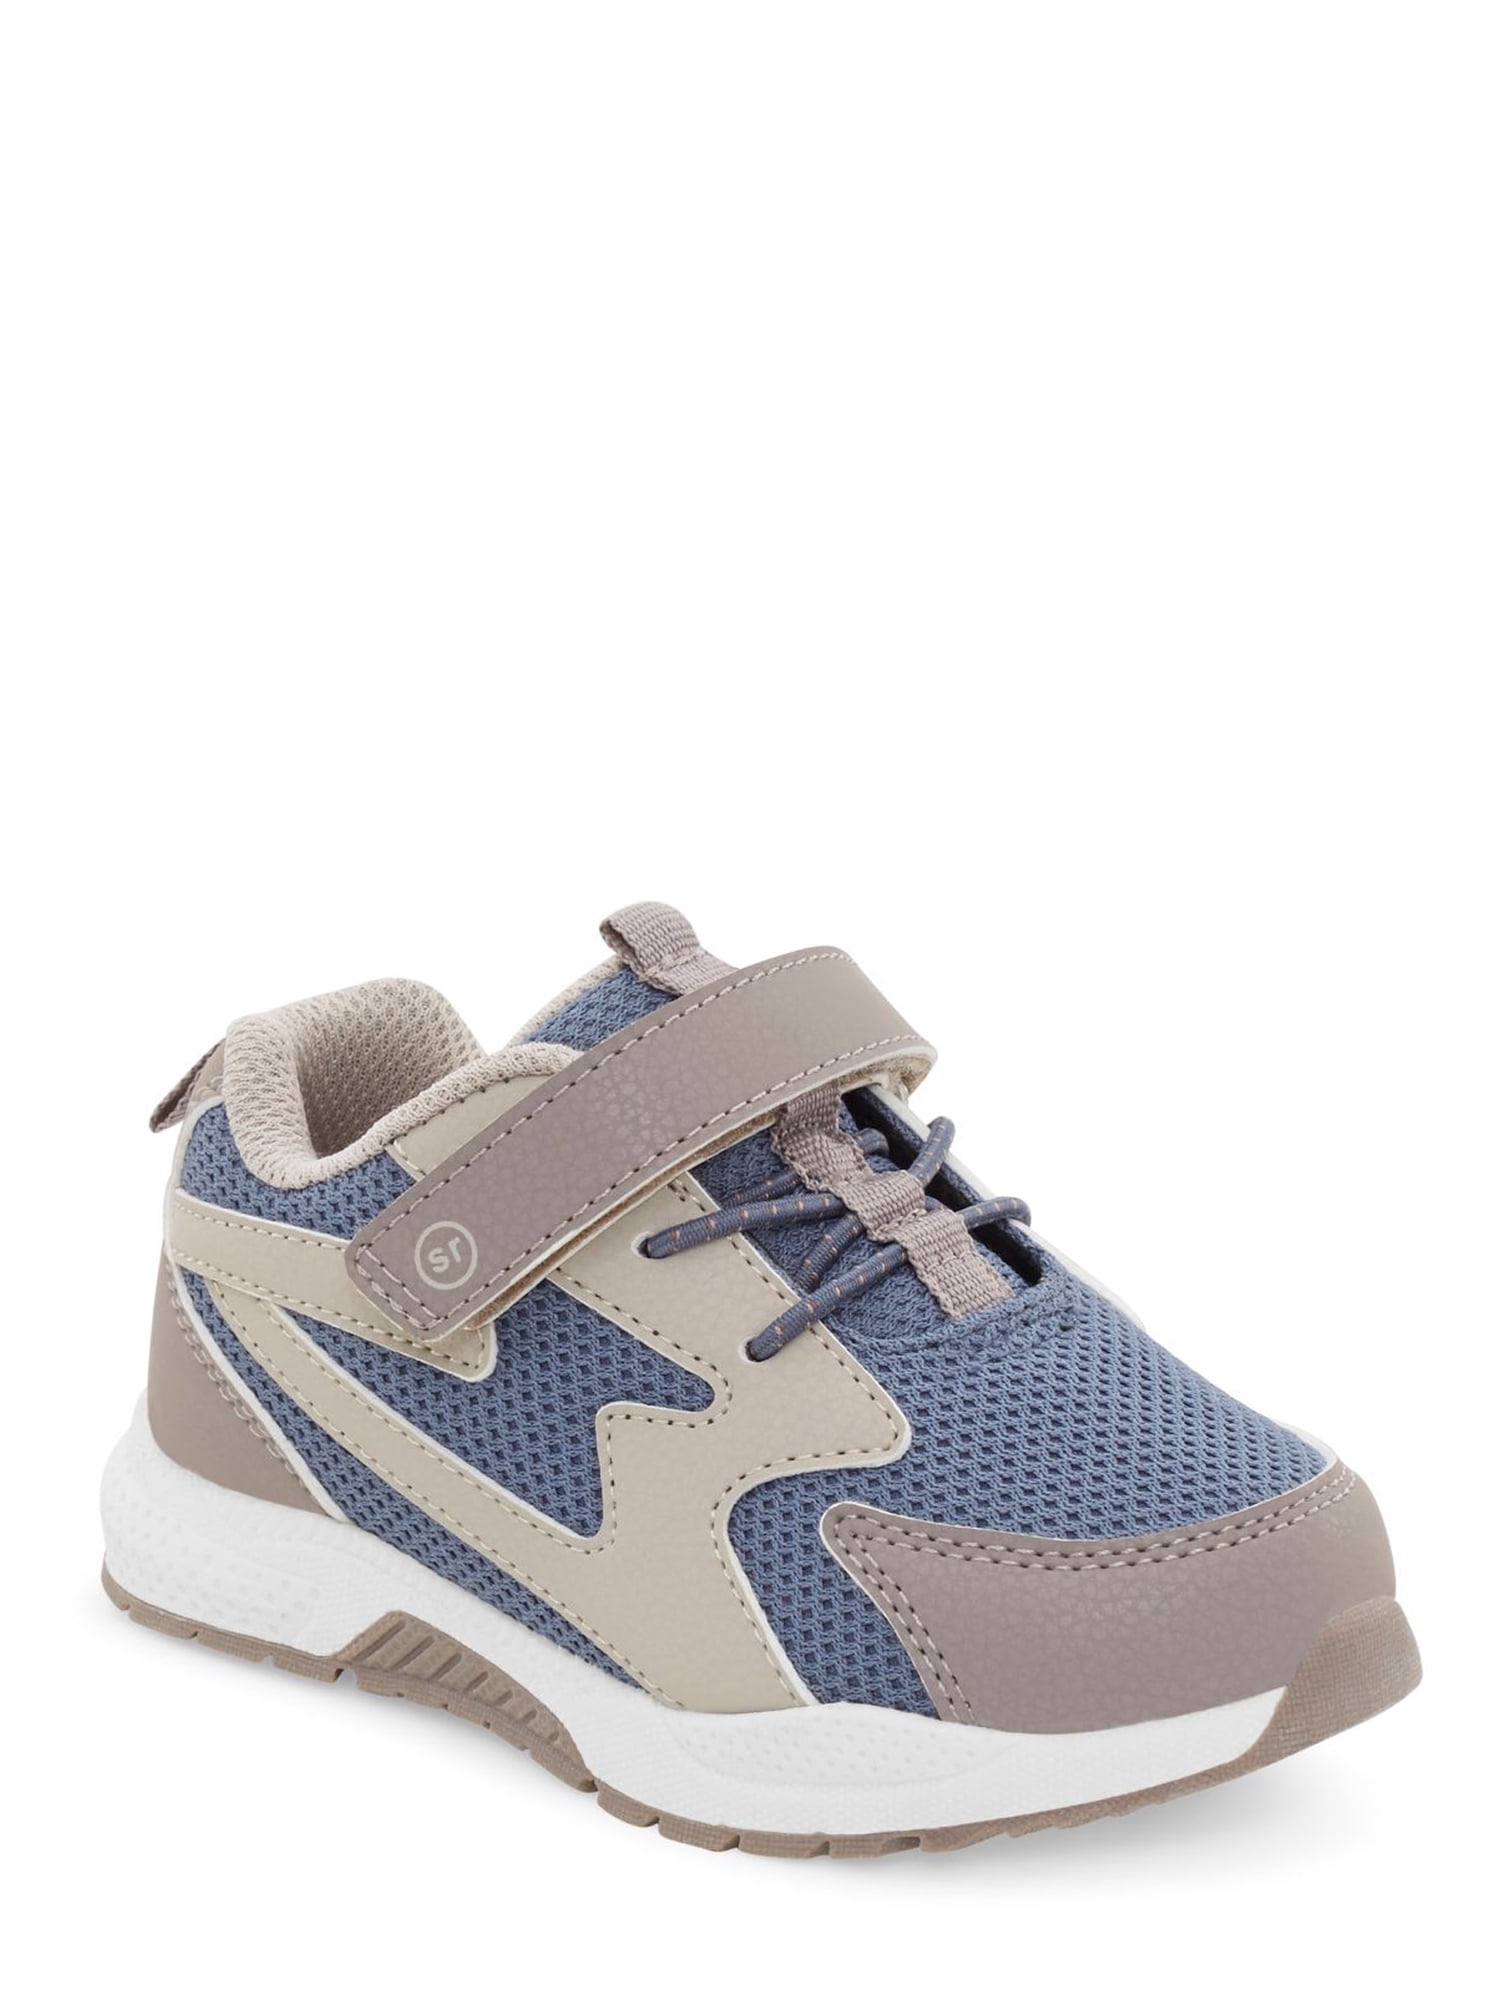 Munchkin by Stride Rite Toddler Boys Electro Athletic Sneakers, Sizes 7 ...